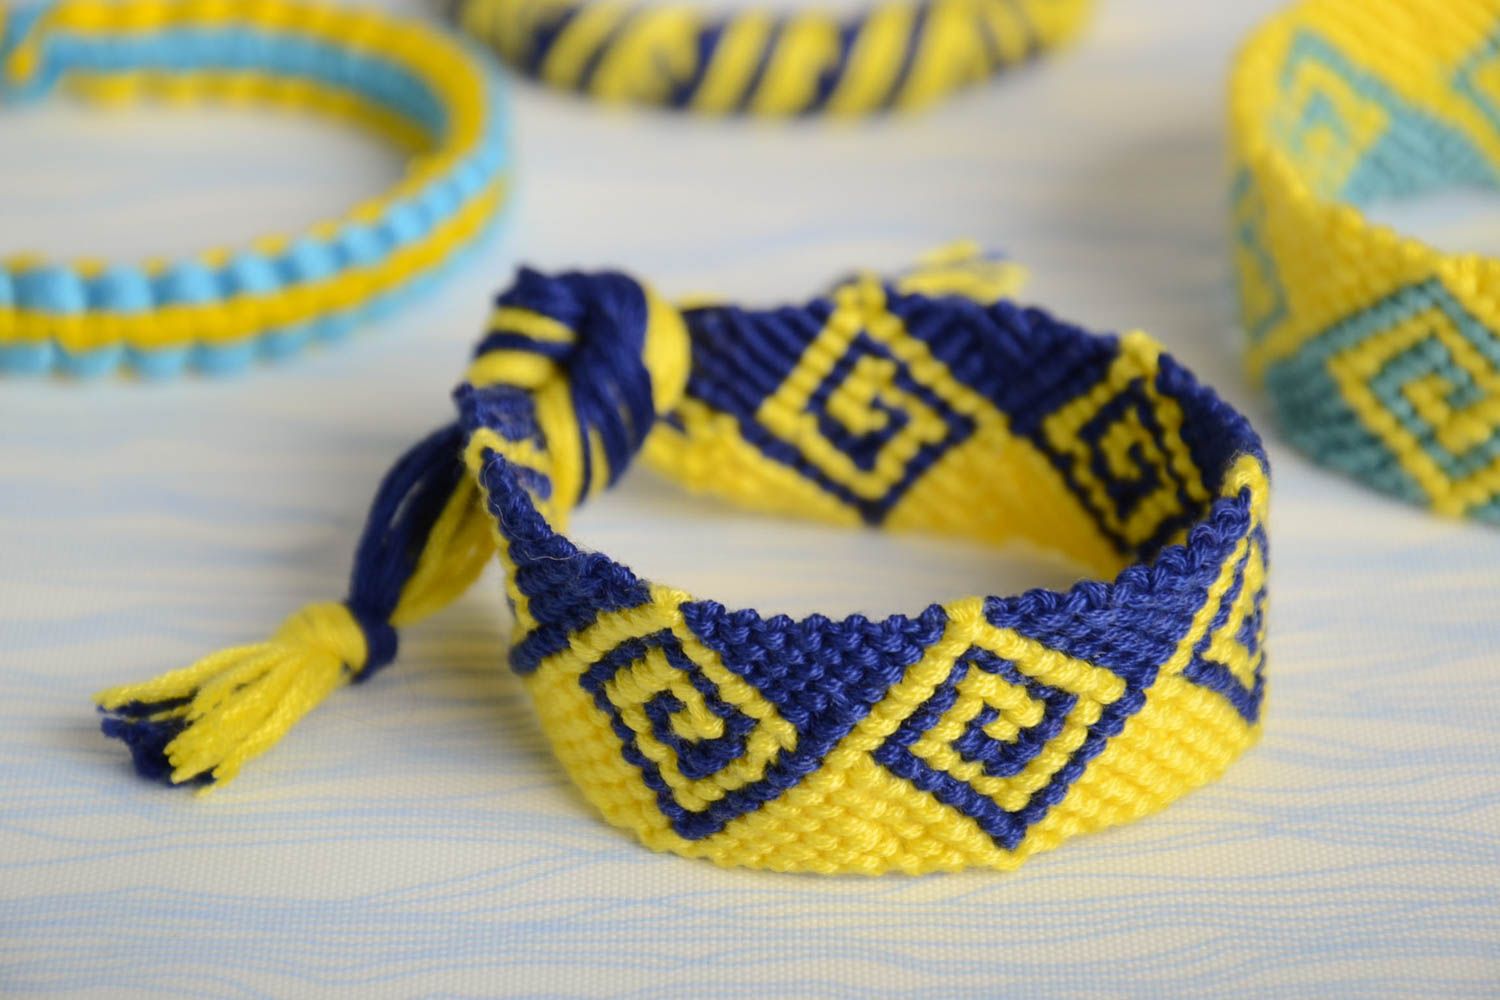 Handmade wide friendship wrist bracelet woven of yellow and blue embroidery floss photo 1